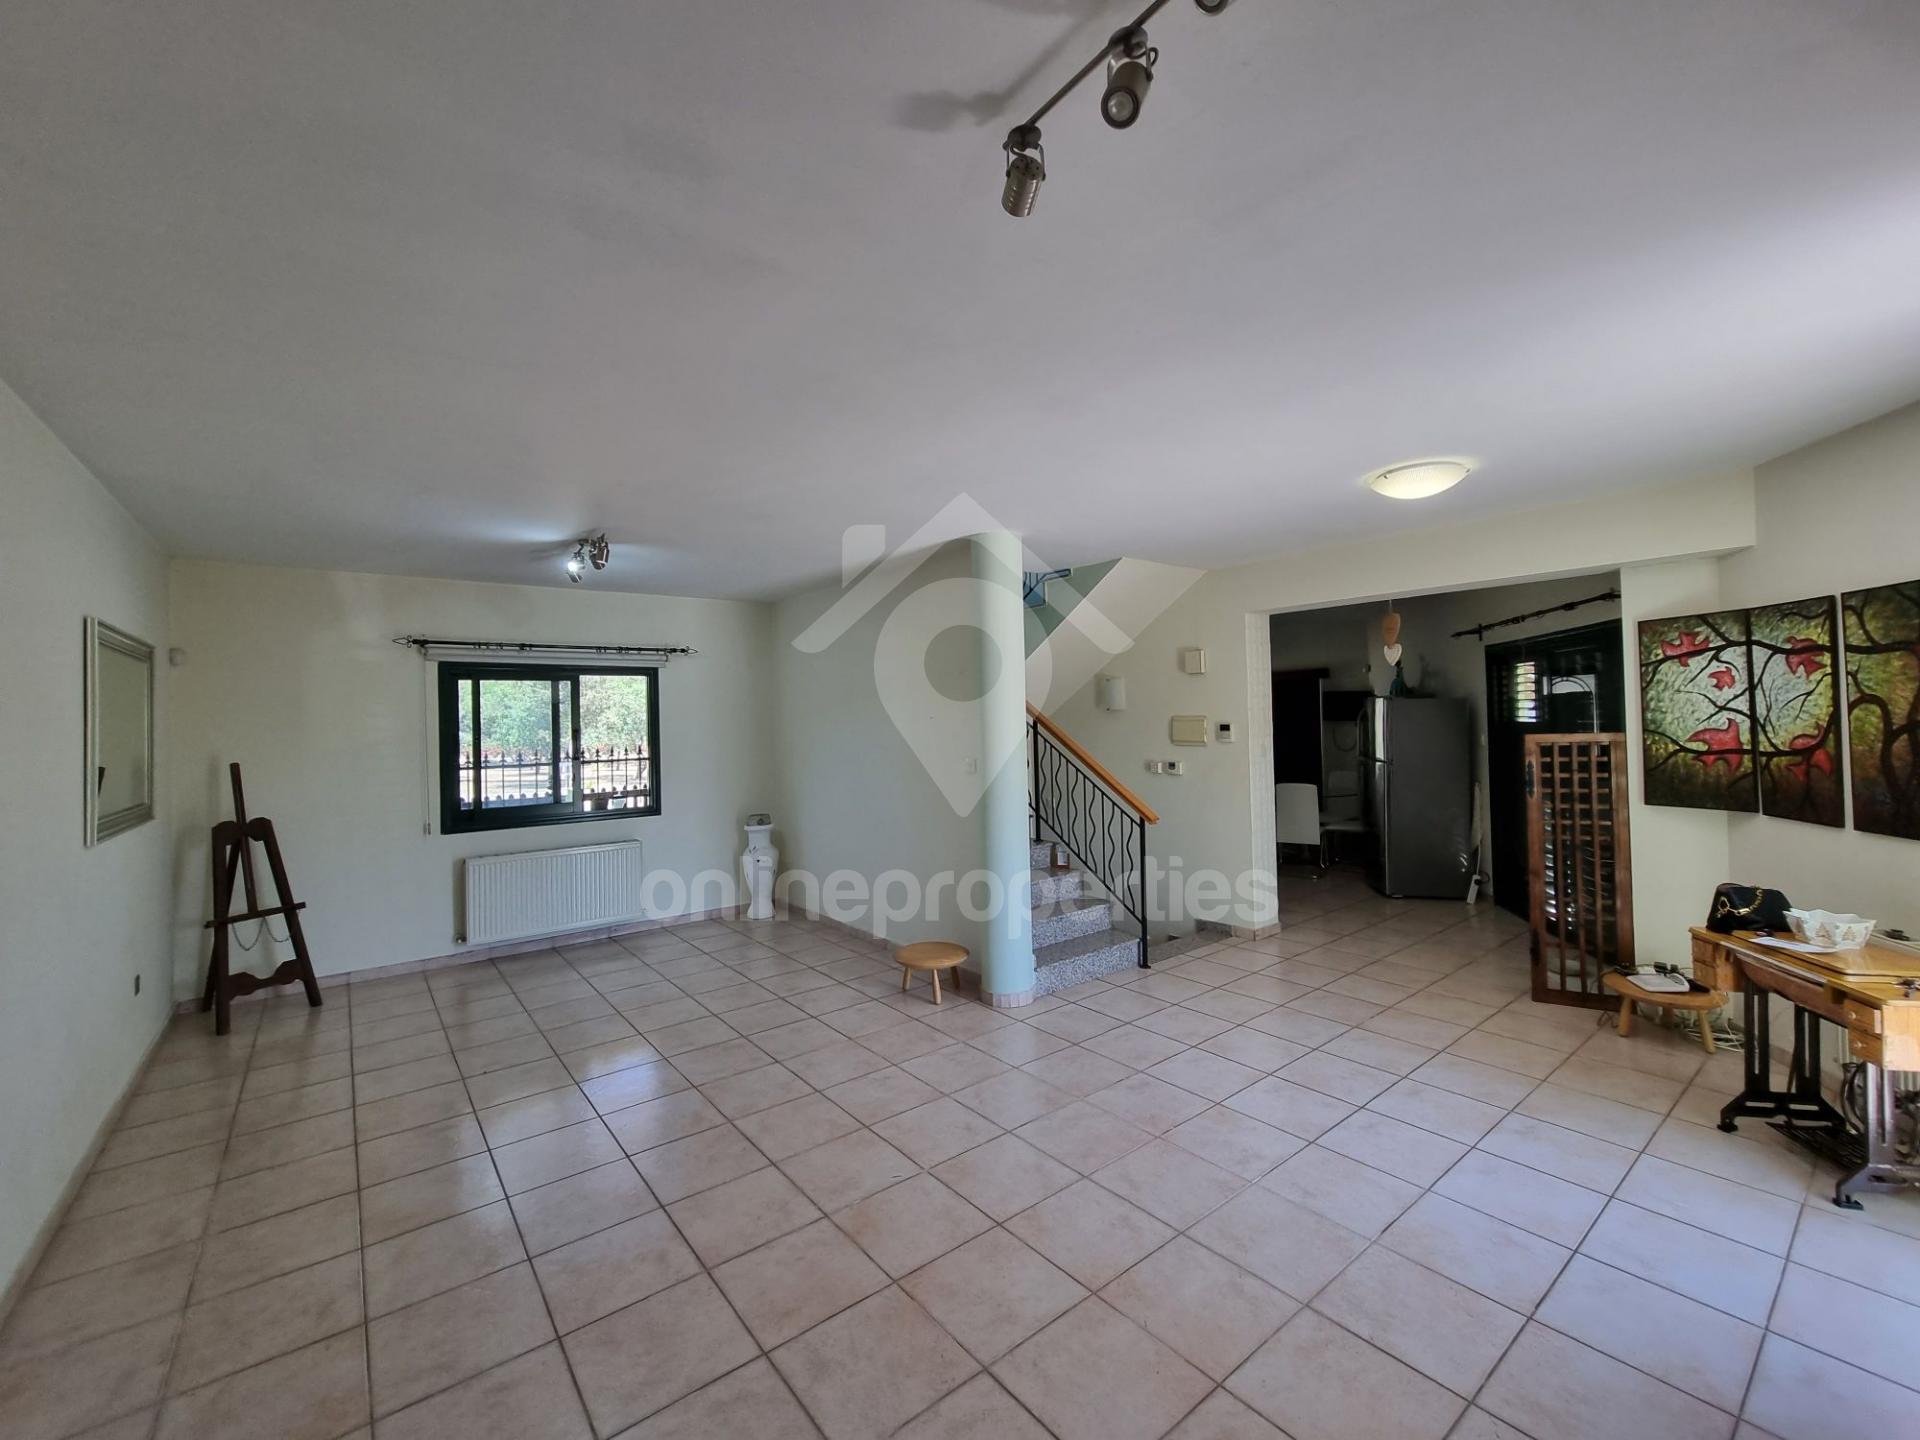 Spacious 4-Bedroom House with Modern Upgrades and Amenities